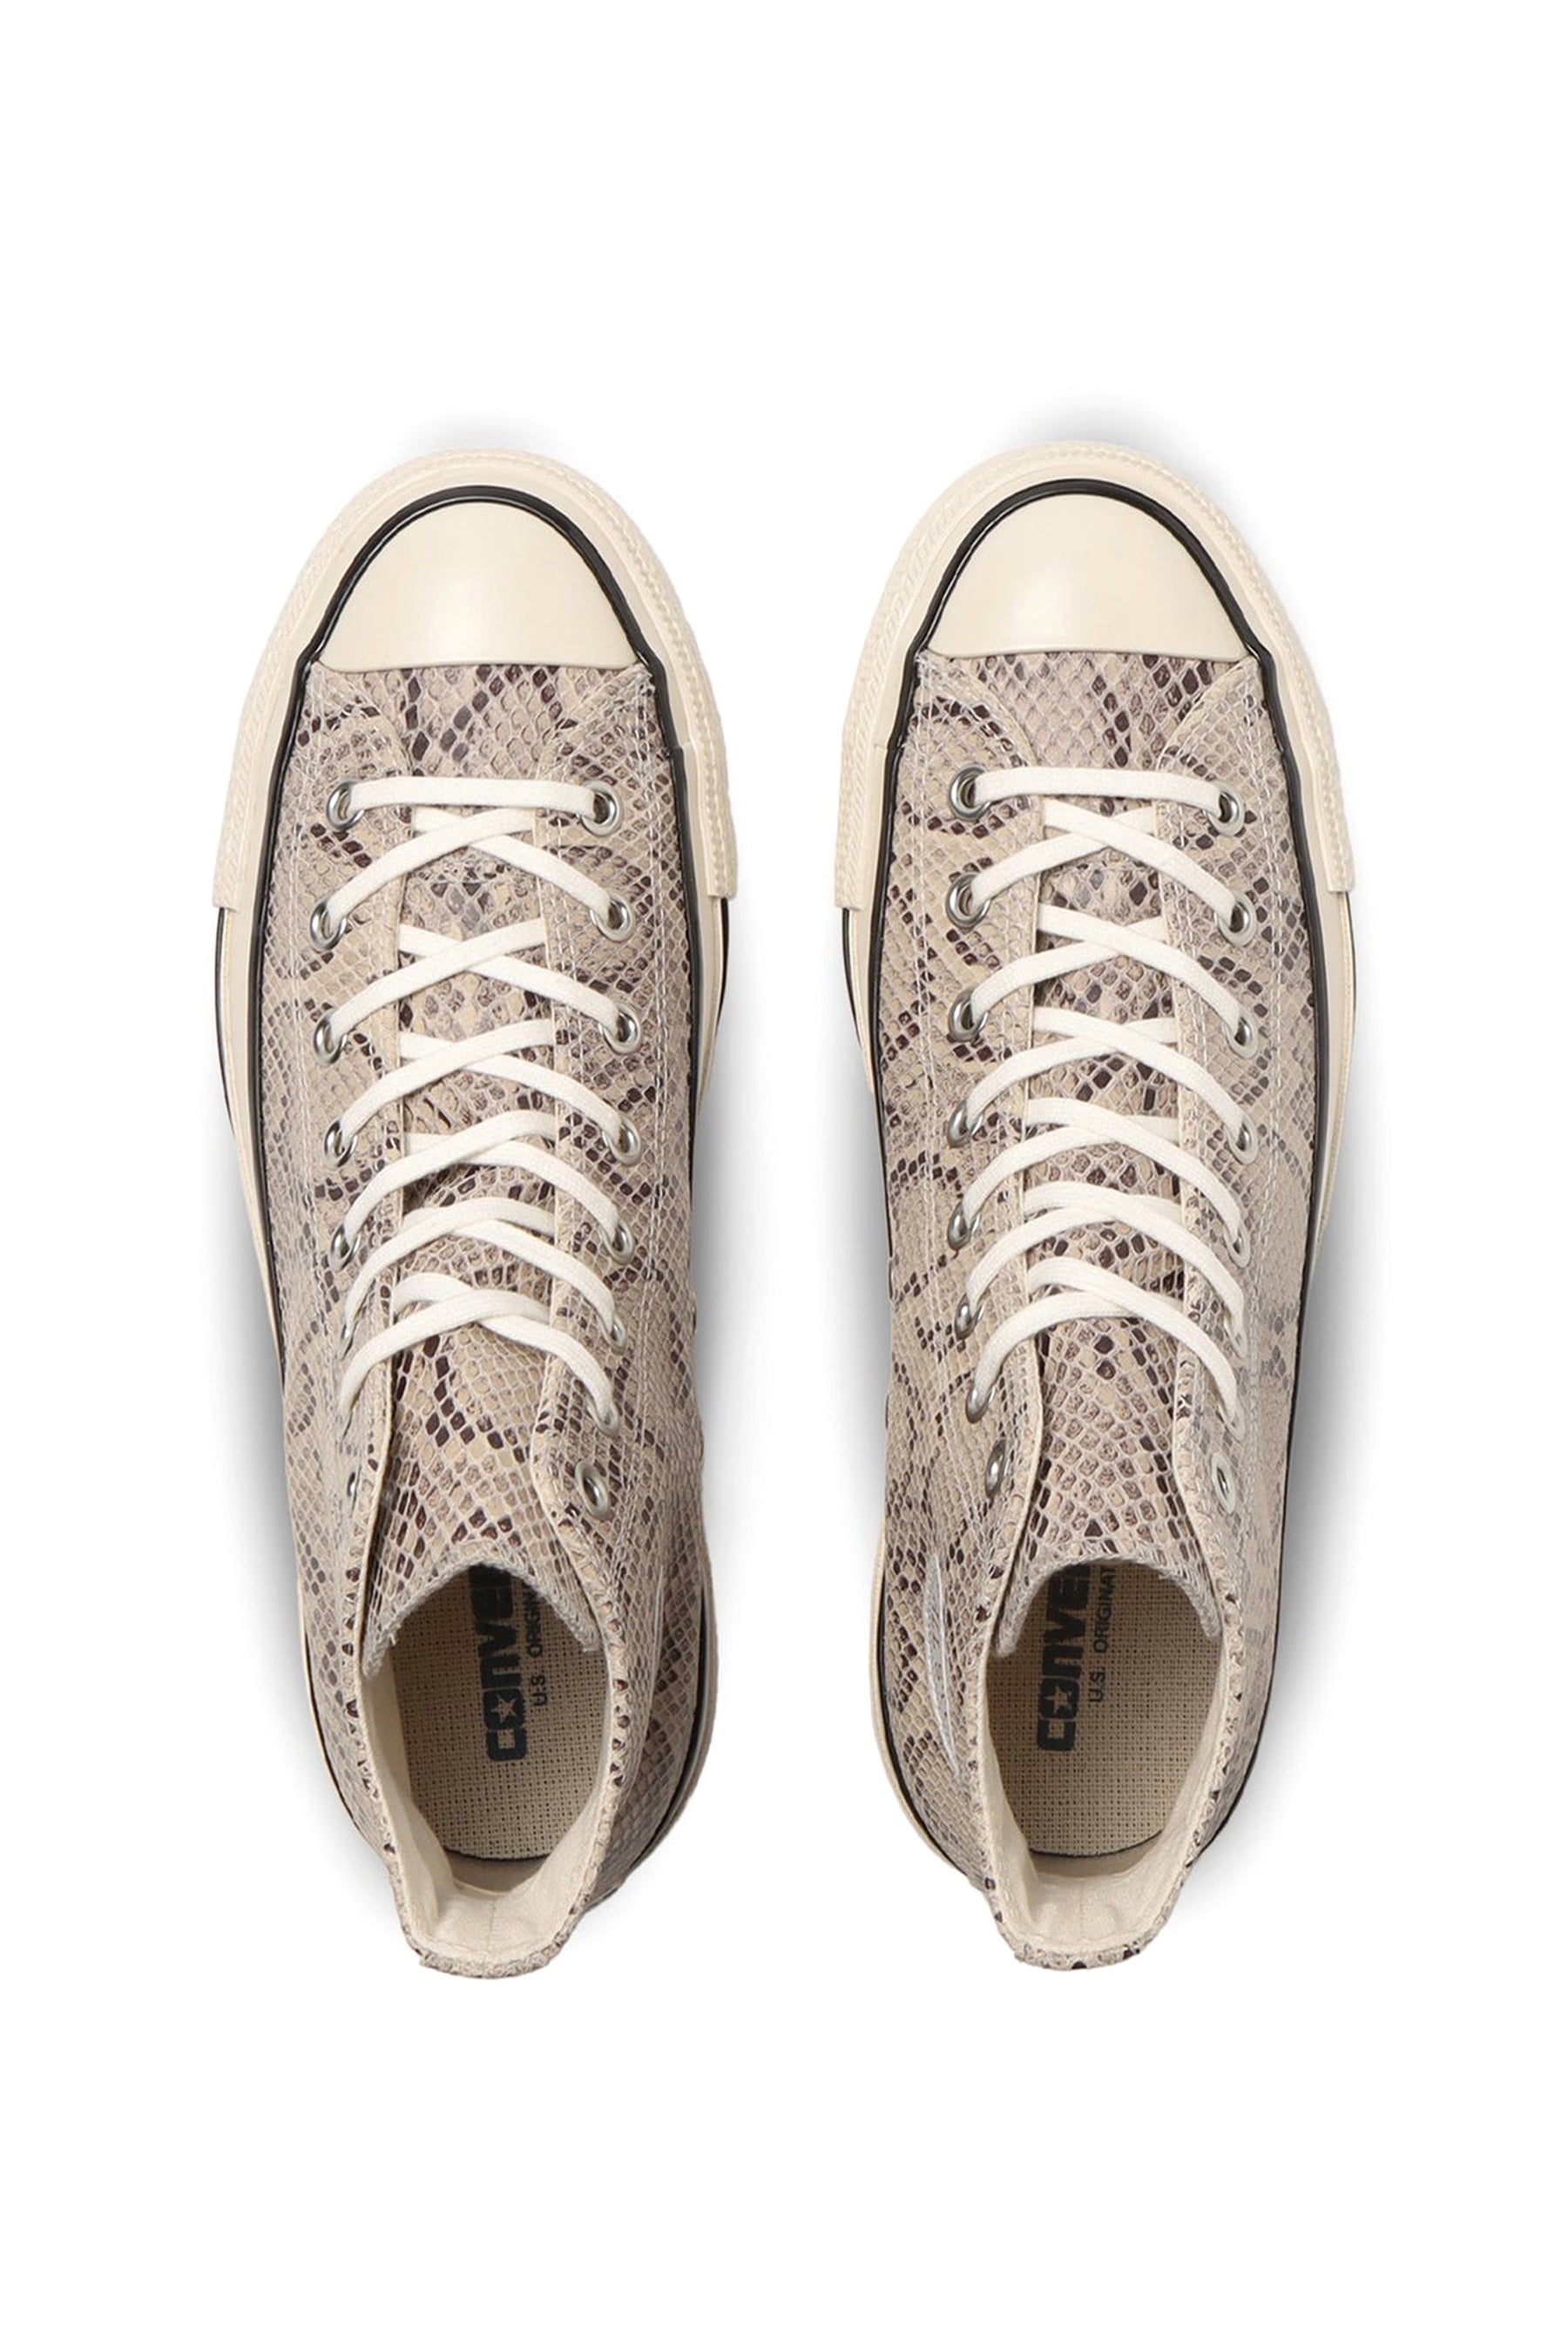 CONVERSE SS23 LEATHER ALL STAR US PYTHON HI / NATURAL - NUBIAN